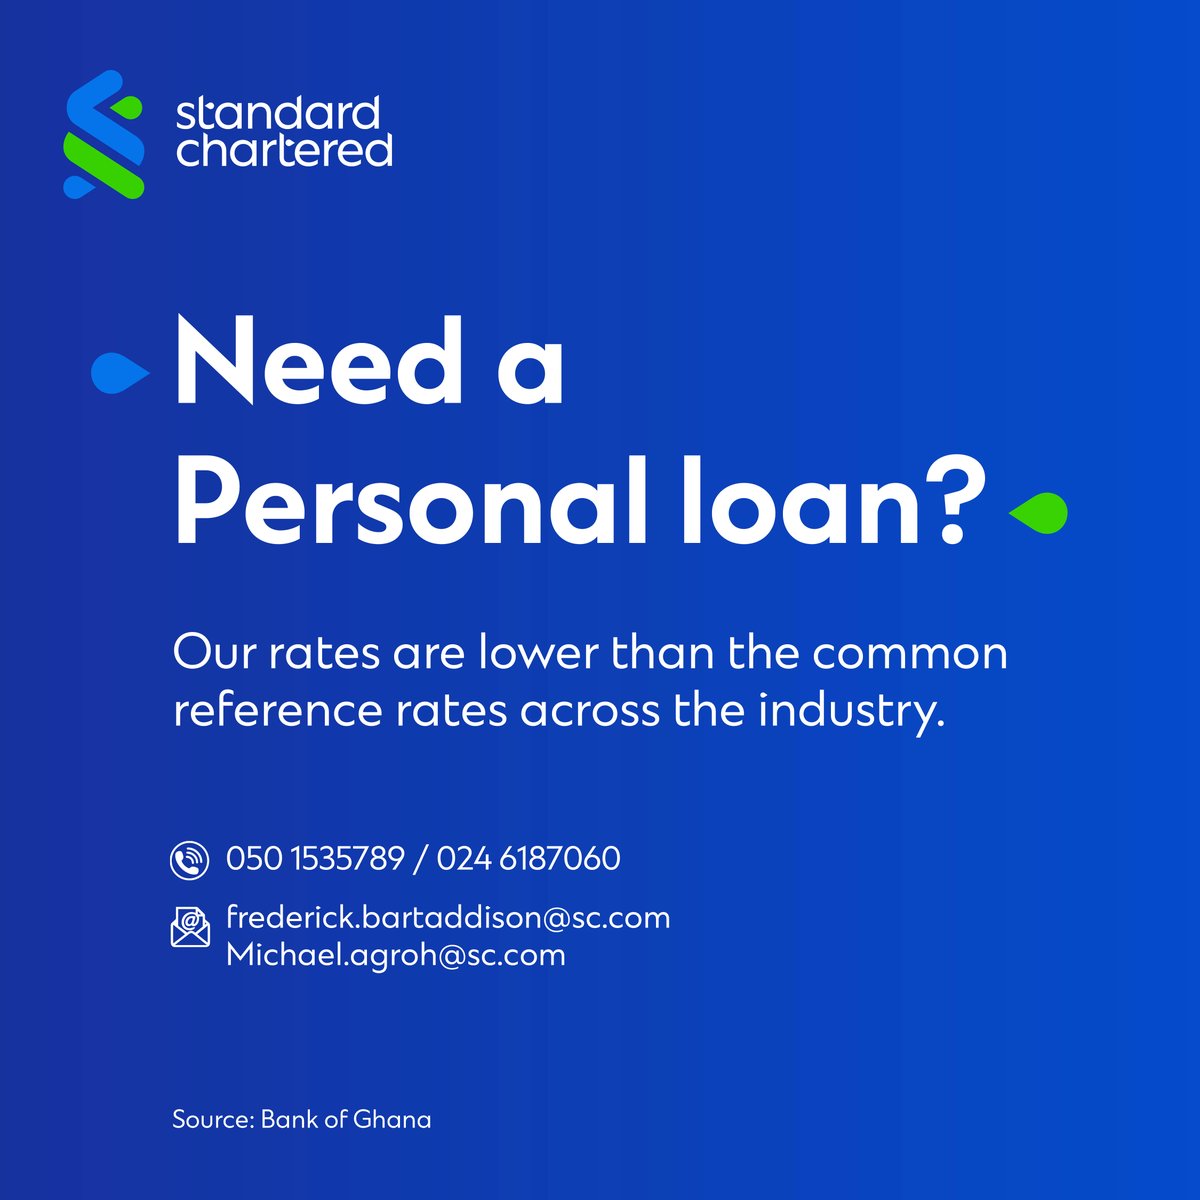 Your financial goals are within reach with our affordable loan options. Simply call us at 050 1535789 or 024 6187060 or click on the link: bit.ly/4bbFq8i to get started. Email us - frederick.bartaddison@sc.com or Michael.agroh@sc.com #StanChartGhana